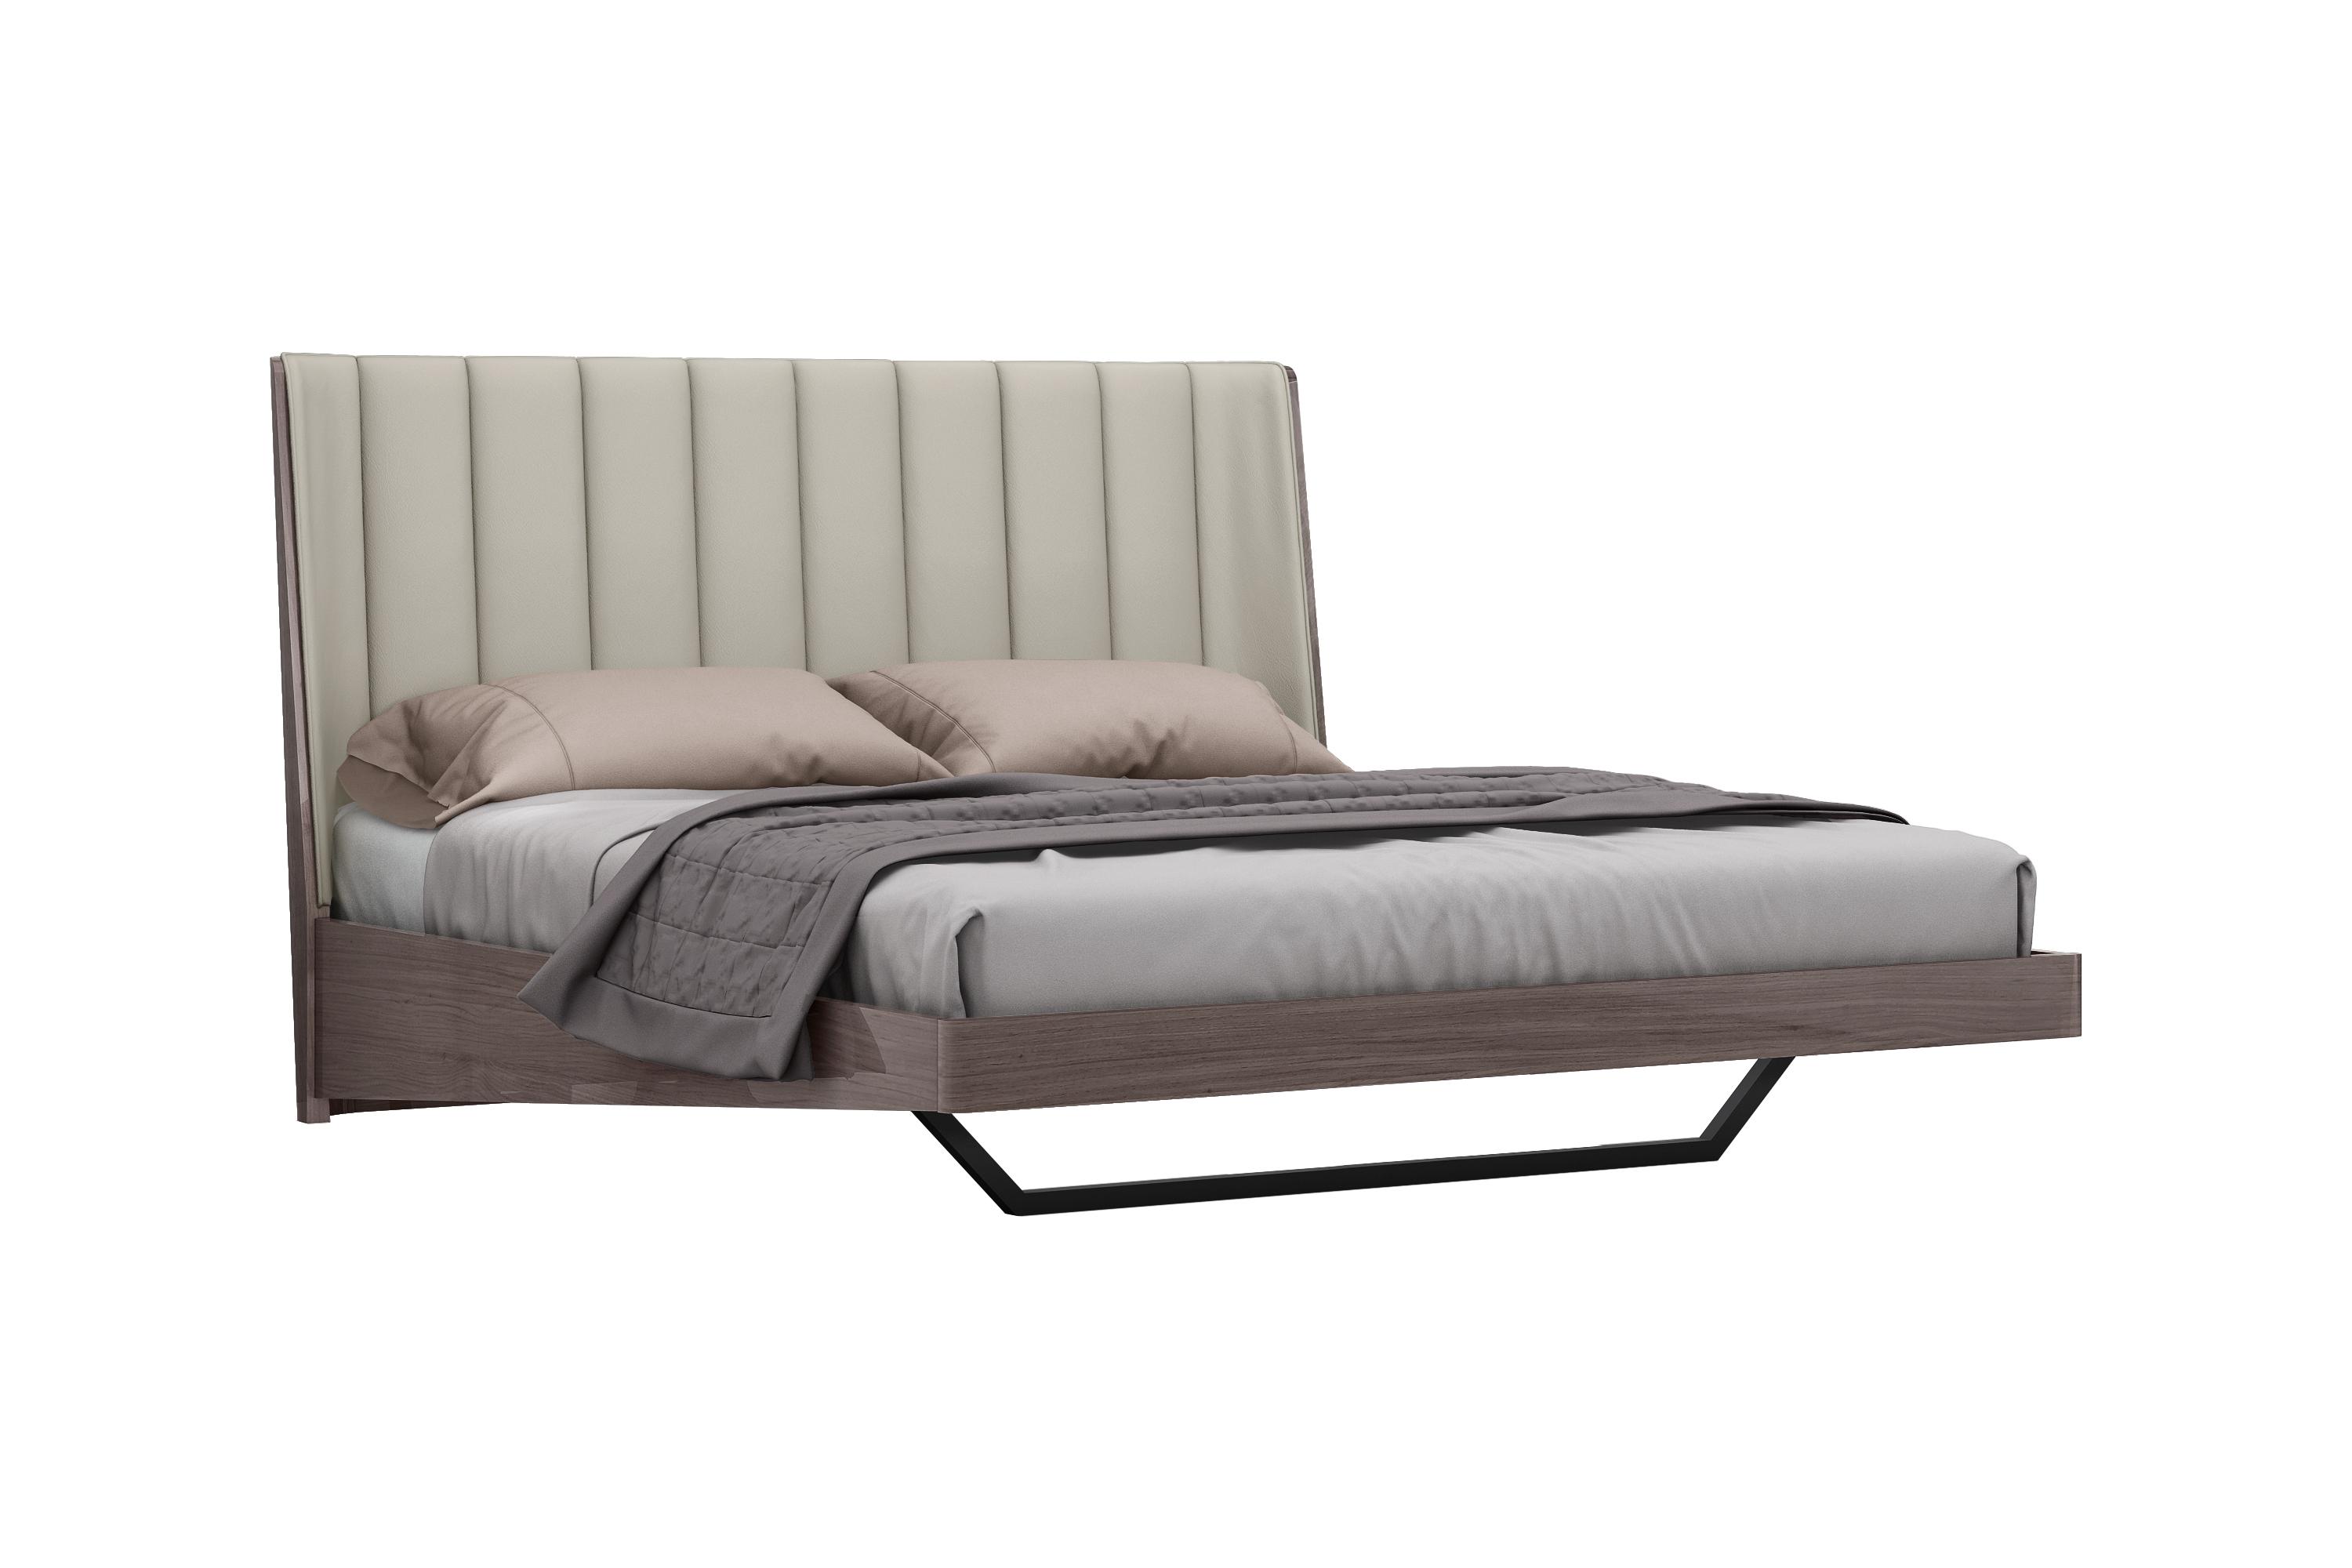 Contemporary Bed BK1754-GRY/LGRY Berlin BK1754-GRY/LGRY in Light Gray Faux Leather